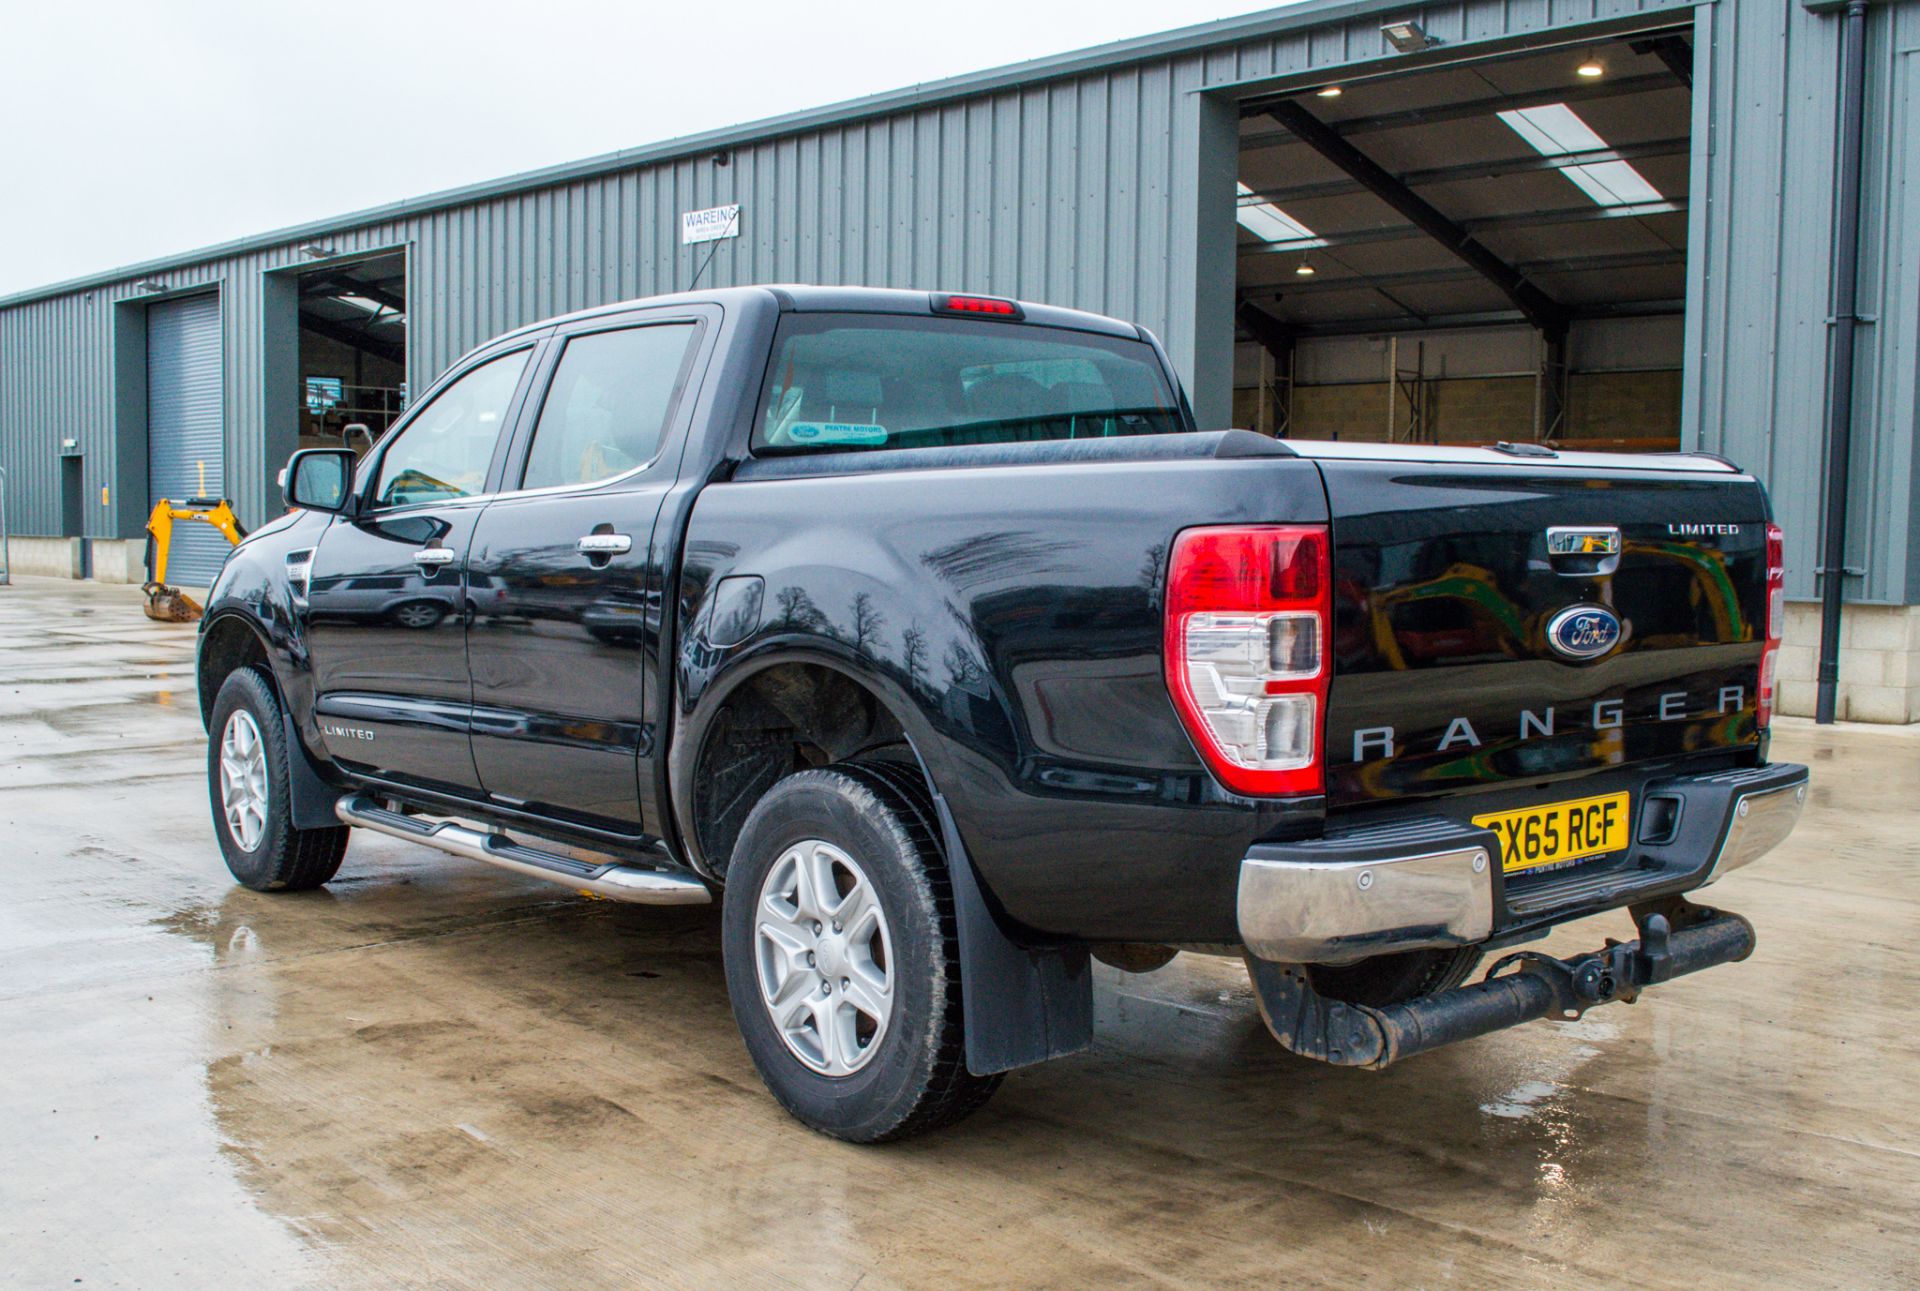 Ford Ranger 2.2 TDCI 150 Limited 4wd automatic double cab pick up - Image 4 of 28